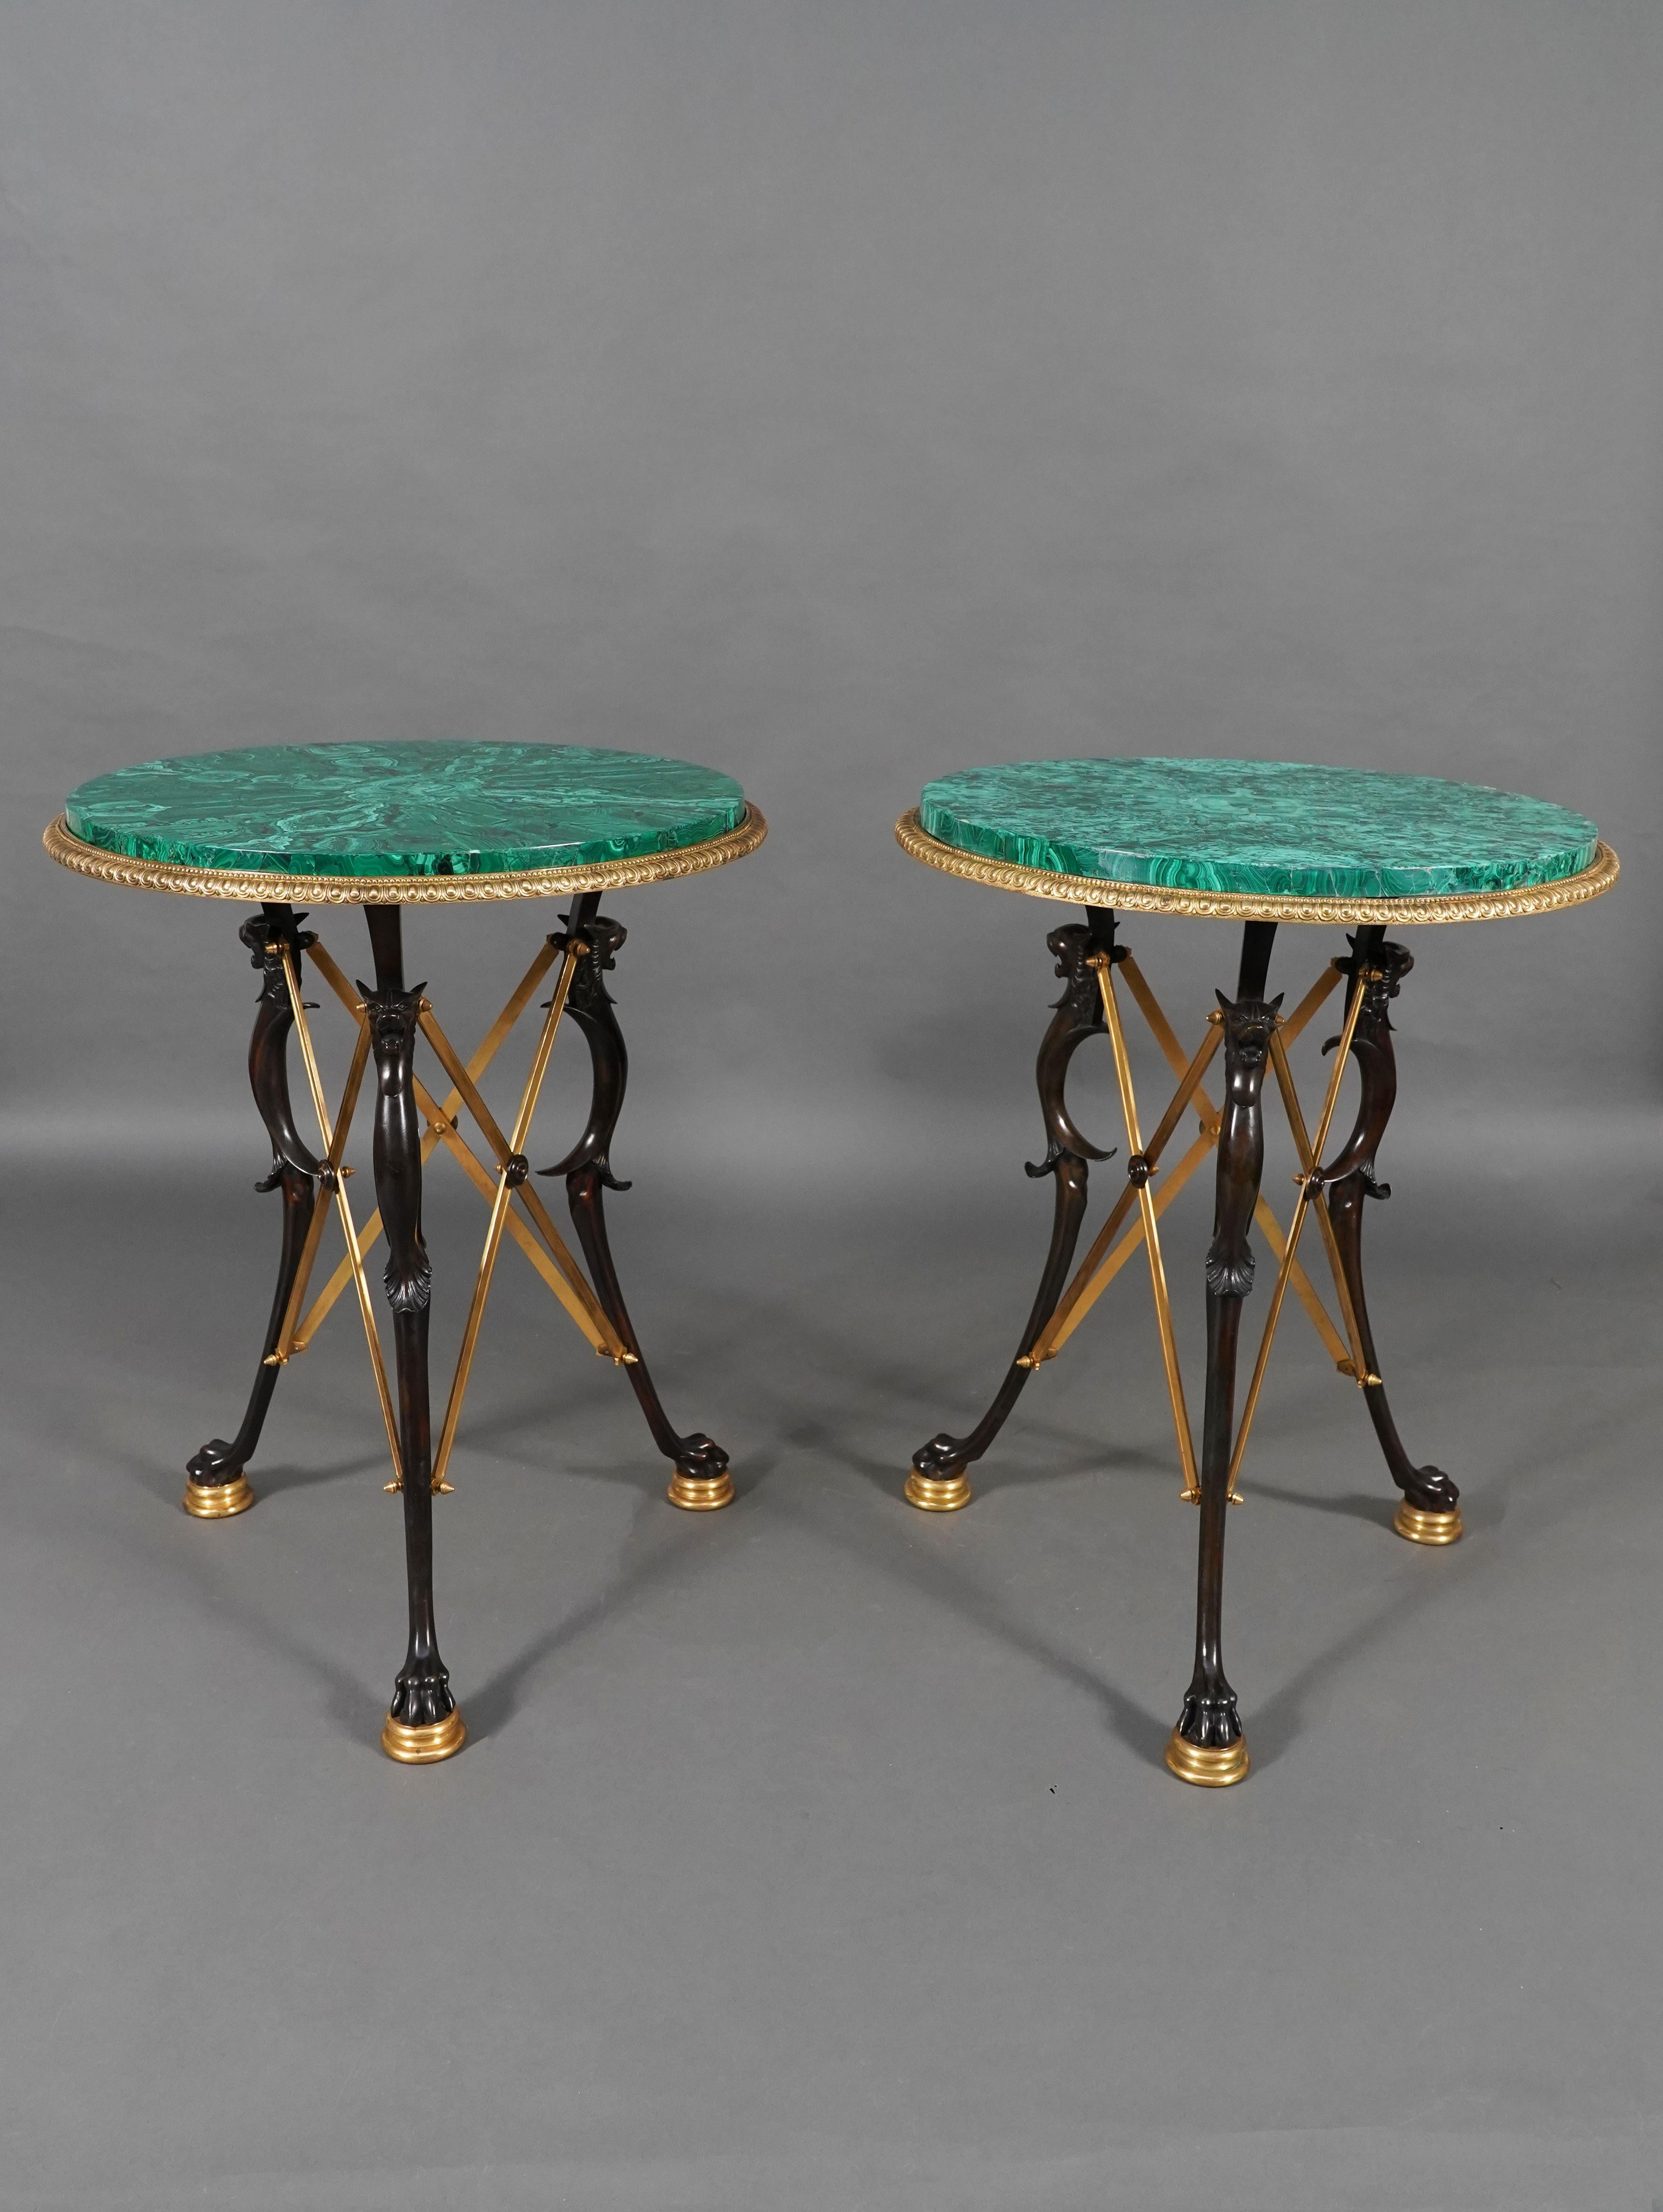 A similar model was exhibited at the 1889 Paris Universal Exhibition.
Rare pair of round table made of patinated and gilded bronze with a top veneered with malachite and circled with bronze mounts adorned with ovum and beads. They stands on three